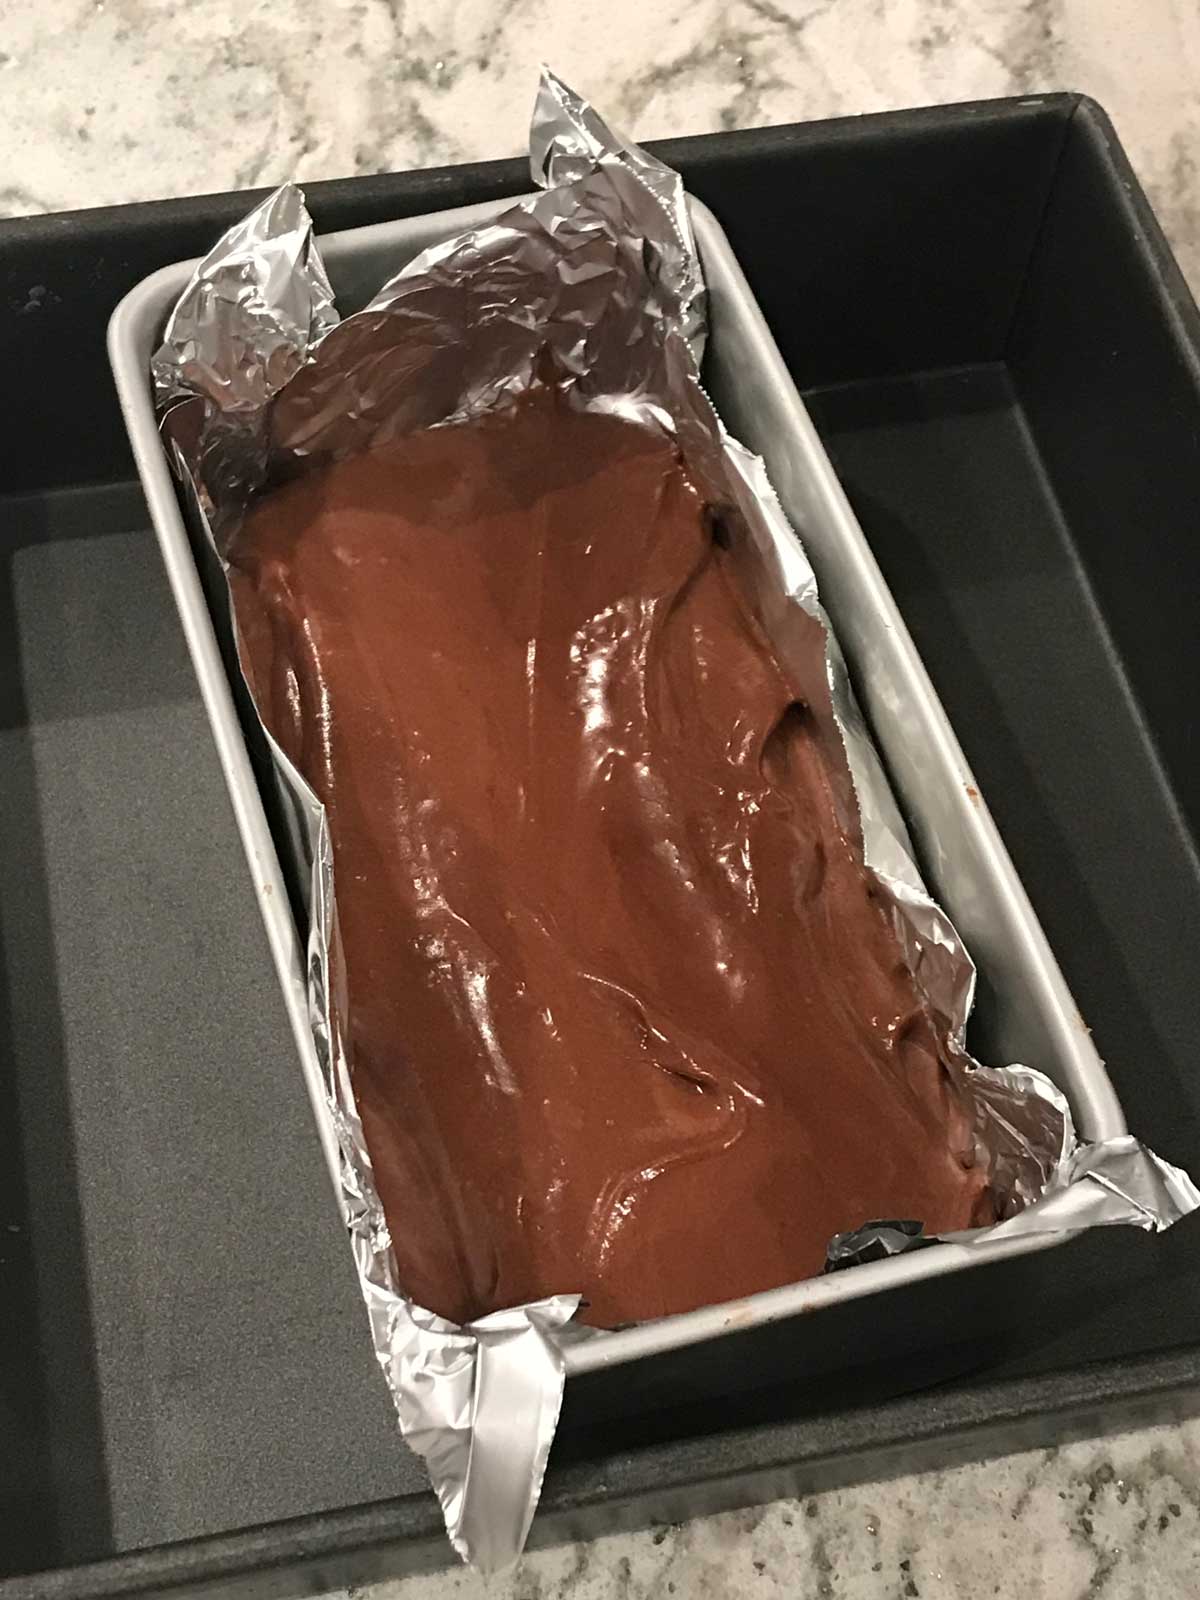 flourless chocolate cake in a loaf pan